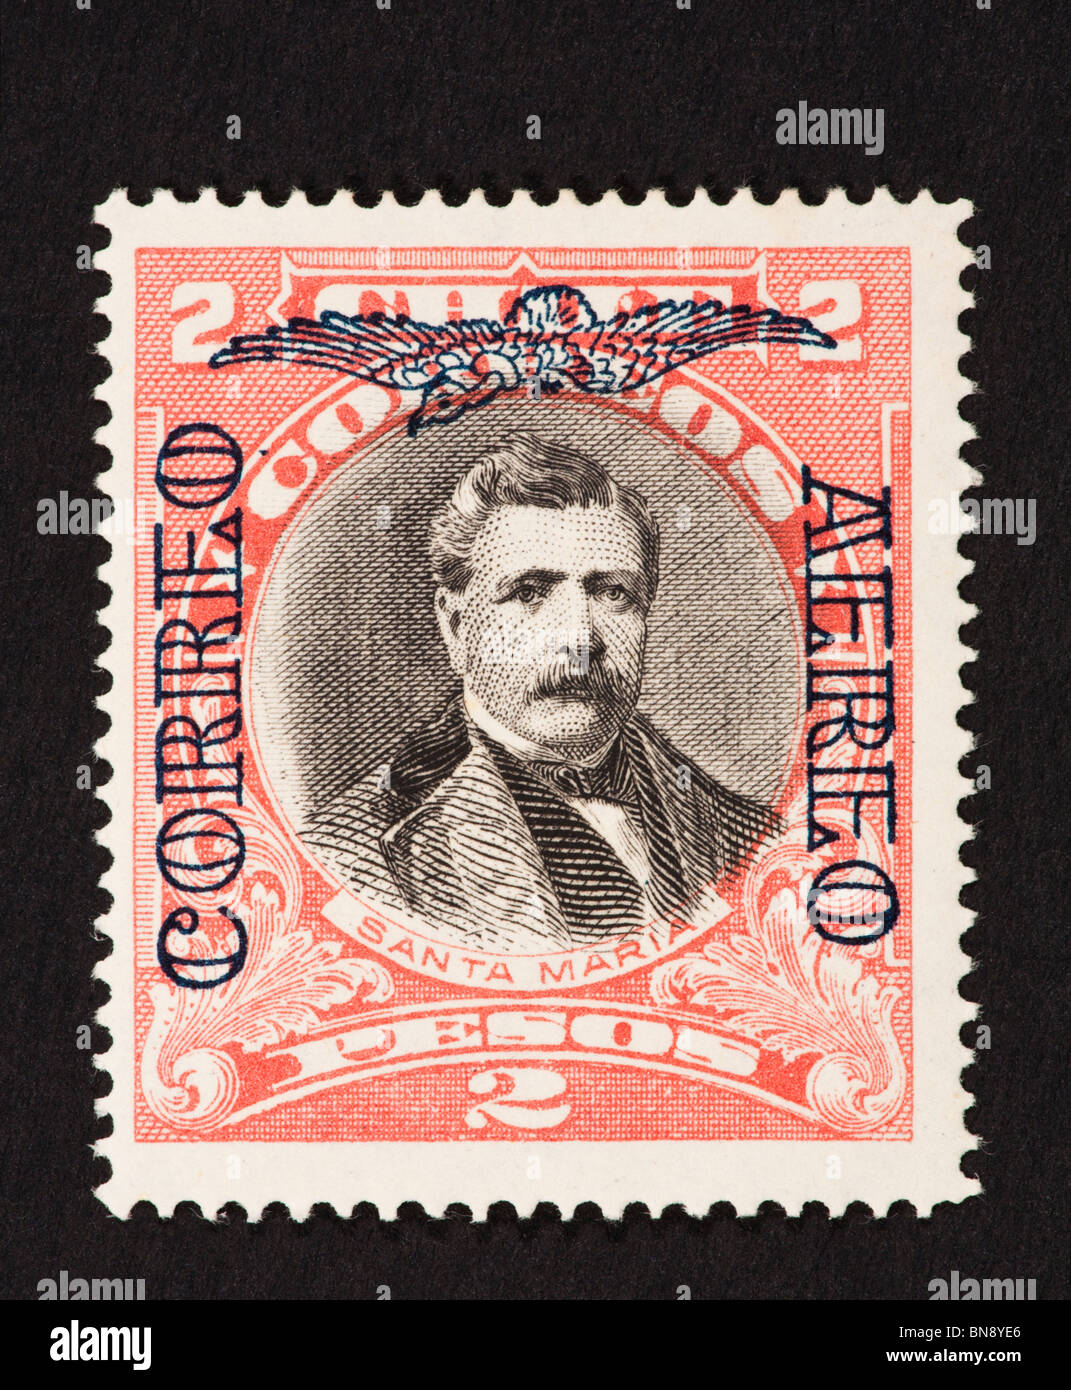 Postage stamp from Chile depicting Domingo Santa Maria Stock Photo